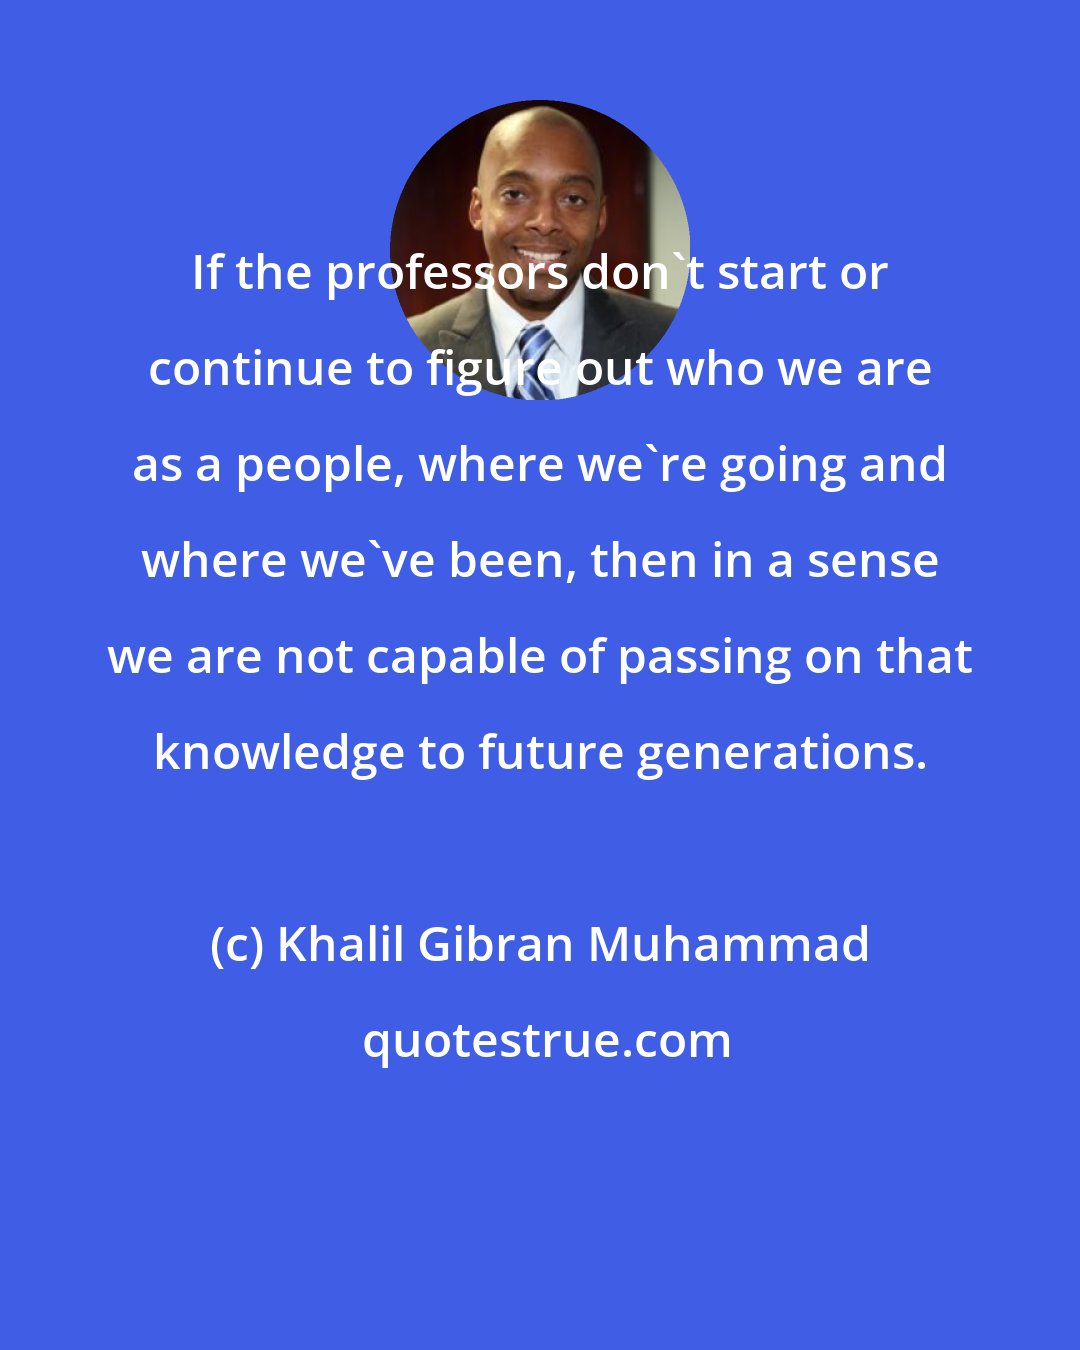 Khalil Gibran Muhammad: If the professors don't start or continue to figure out who we are as a people, where we're going and where we've been, then in a sense we are not capable of passing on that knowledge to future generations.